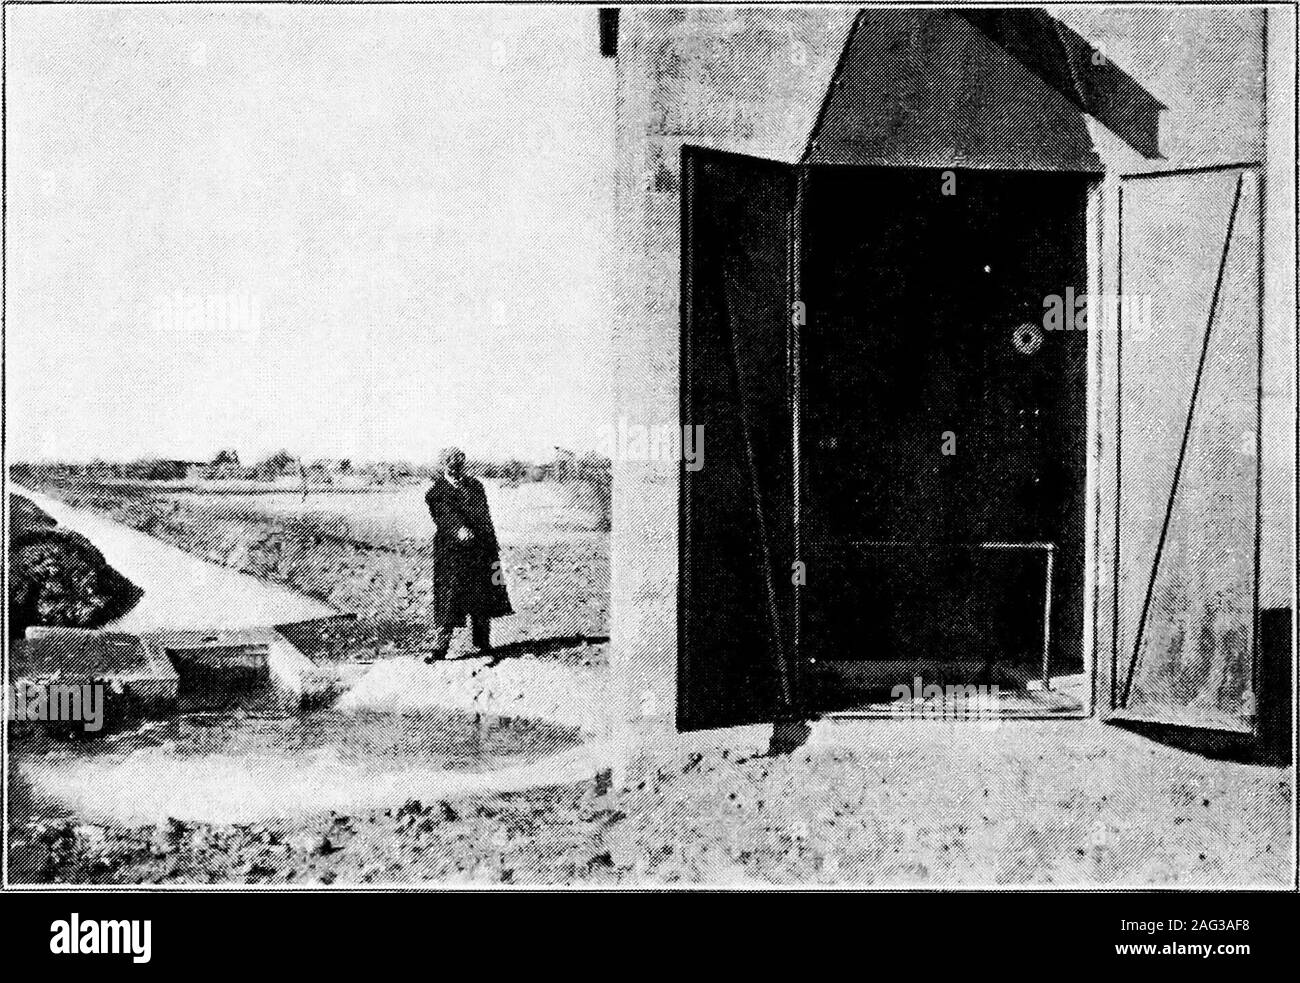 . Principles of irrigation engineering, arid lands, water supply, storage works, dams, canals, water rights and products. d^. Fig. C.—Generators driven by water power furnishing electrical energy forpumps. Minidoka Project, Idaho.. Fig. D.—Electrically operated centrifugal pumps delivering water to laterals onGila River Indian Reservation, Ariz. IRRIGATION BY PUMPING 125 h.p., thus irrigating large tracts of lands. Although the largedistillate engine which requires the services of an engineer is not aseconomical as a high-grade steam plant using the cruder unrefinedoils, yet as the irrigation Stock Photo